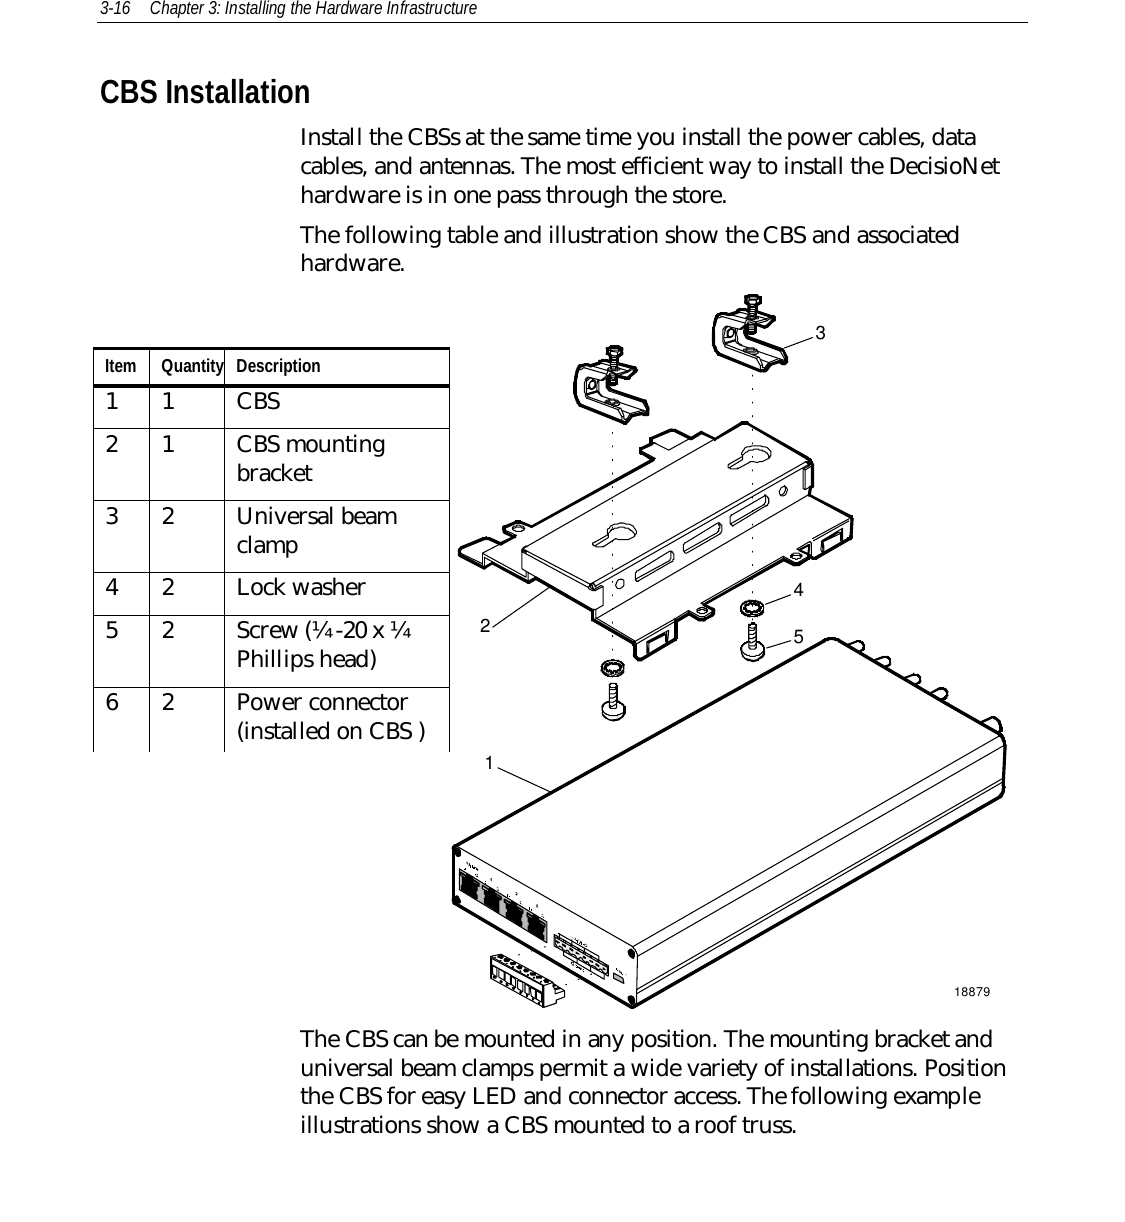 3-16 Chapter 3: Installing the Hardware InfrastructureCBS InstallationInstall the CBSs at the same time you install the power cables, datacables, and antennas. The most efficient way to install the DecisioNethardware is in one pass through the store.The following table and illustration show the CBS and associatedhardware.1887921453The CBS can be mounted in any position. The mounting bracket anduniversal beam clamps permit a wide variety of installations. Positionthe CBS for easy LED and connector access. The following exampleillustrations show a CBS mounted to a roof truss.Item Quantity Description11 CBS21 CBS mountingbracket3 2 Universal beamclamp42 Lock washer5 2 Screw (¼ -20 x ¼Phillips head)62 Power connector(installed on CBS )